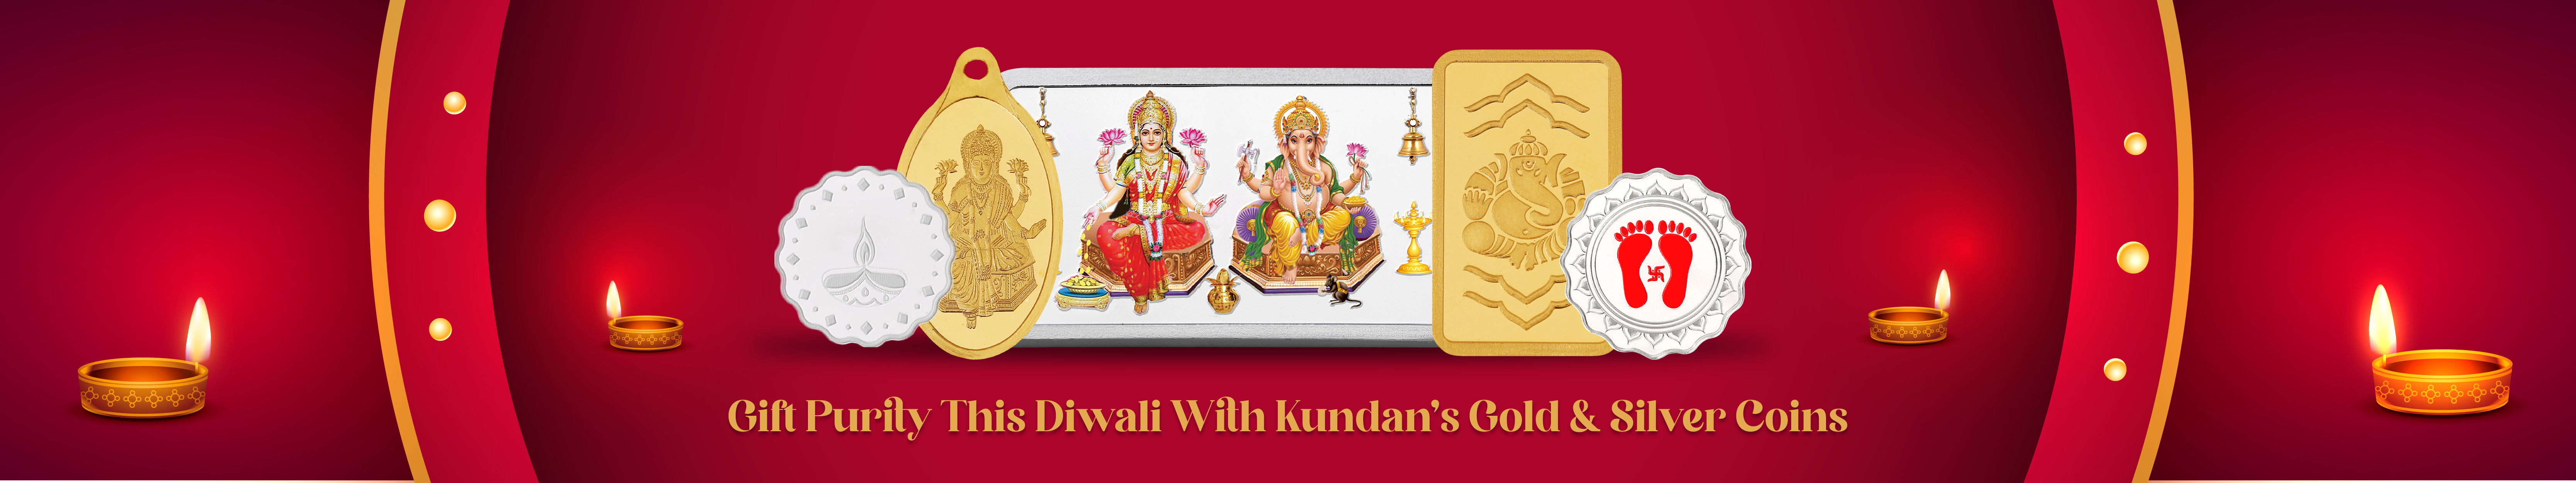 Gift Purity This Diwali With Kundan’s Gold & Silver Coins